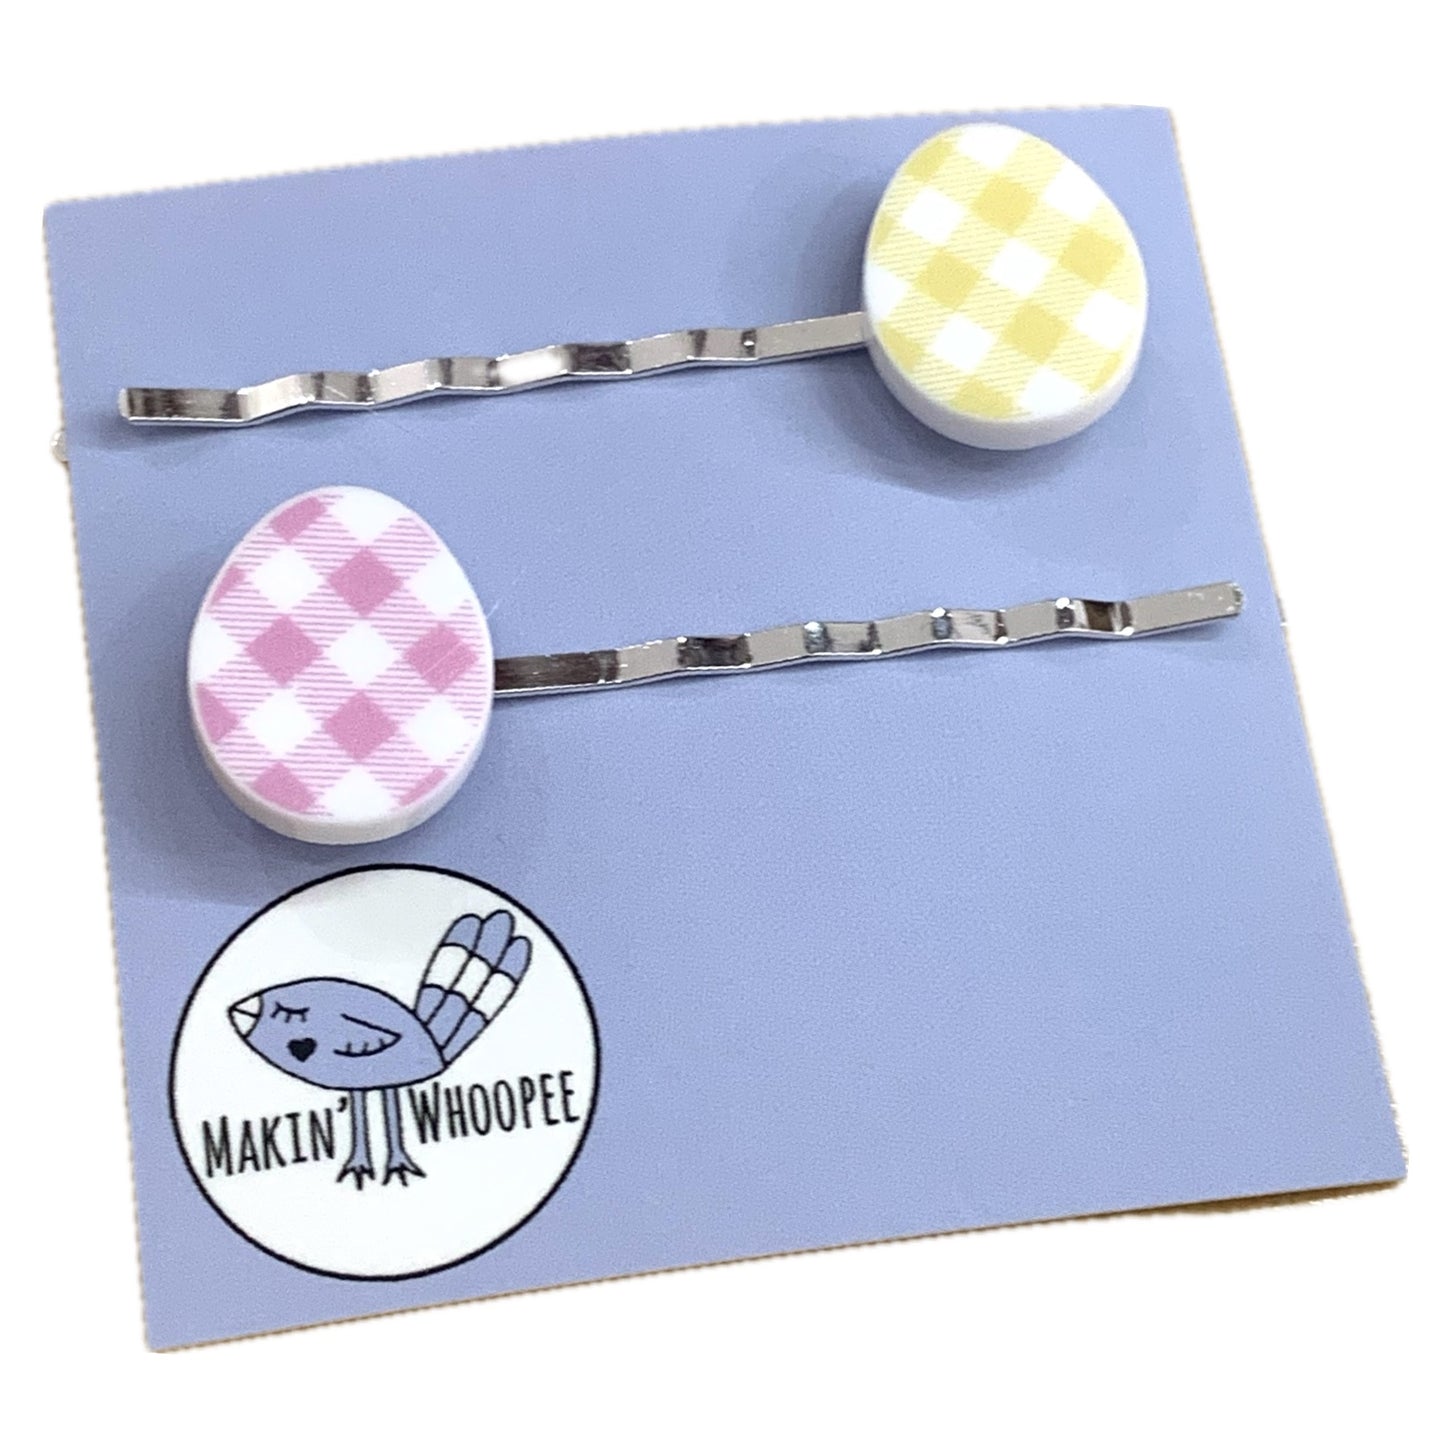 MAKIN' WHOOPEE EASTER HAIR CLIPS - YELLOW & PINK GINGHAM